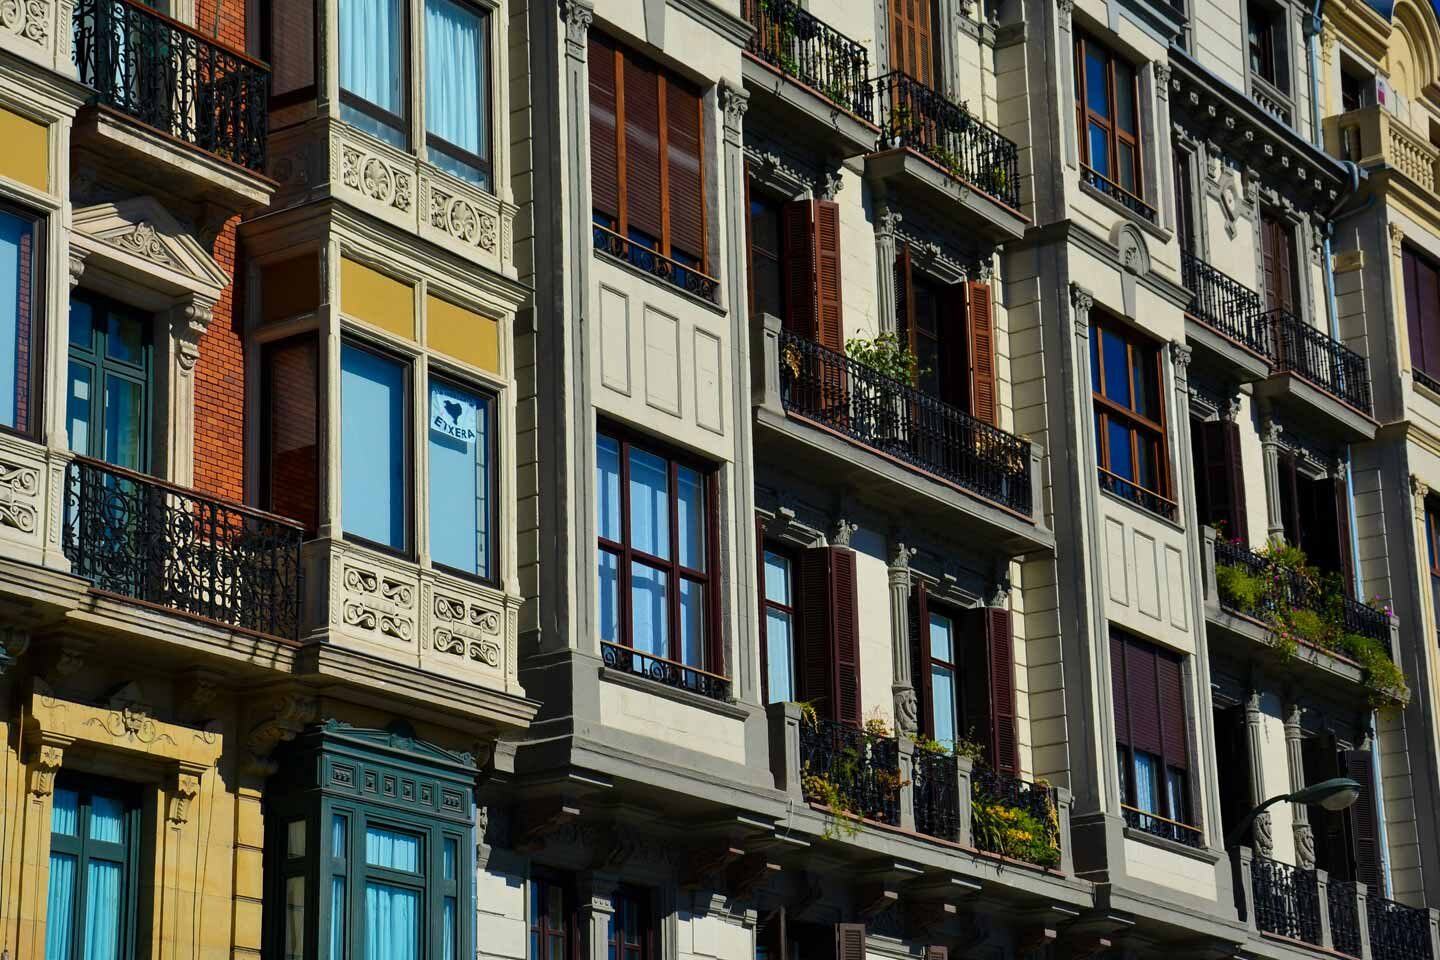 Colourful exteriors of buildings in Bilbao